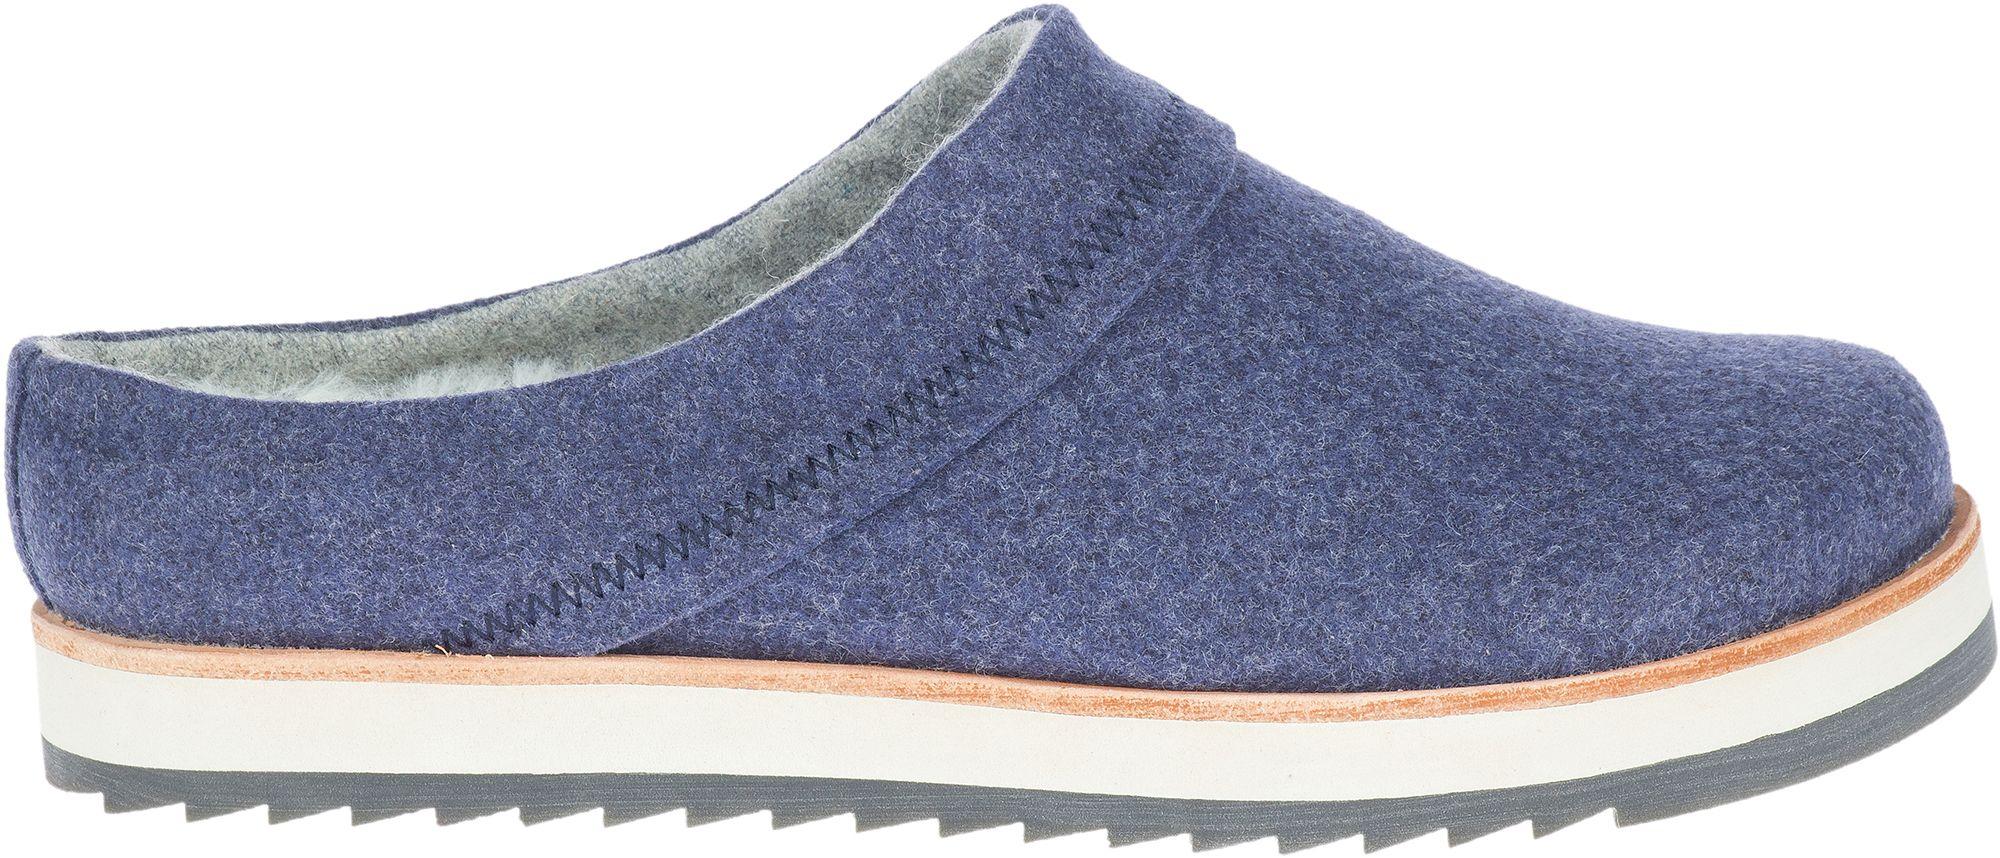 Merrell Juno Clog Wool Shoes in Navy (Blue) - Save 60% | Lyst